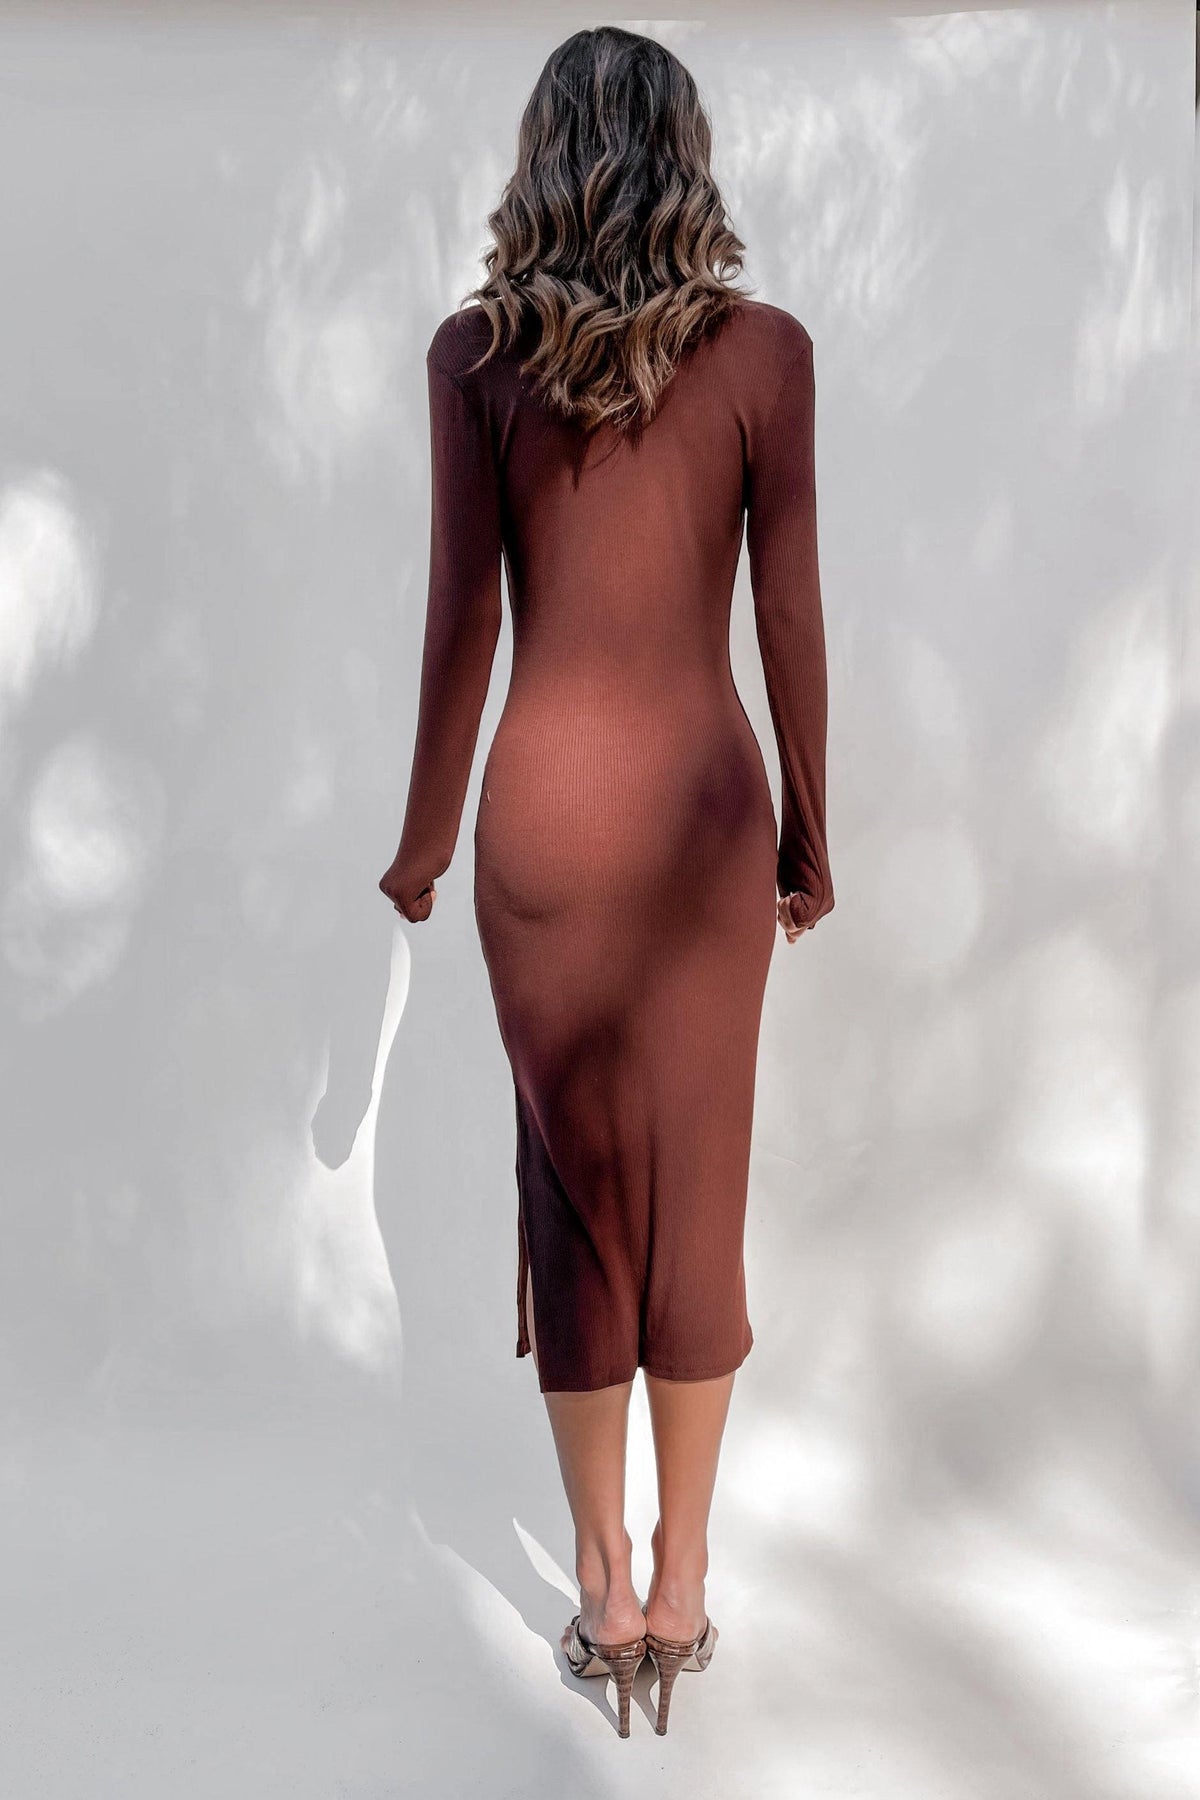 A Better Place Dress, BROWN, BUTTON UP, DRESS, DRESSES, LONG SLEEVE, MIDI DRESS, NYLON AND RAYON, RED, Sale, SIDE SPLIT, A Better Place Dress only $63.00 @ MISHKAH ONLINE FASHION BOUTIQUE, Shop The Latest Women&#39;s Dresses - Our New A Better Place Dress is only $63.00, @ MISHKAH ONLINE FASHION BOUTIQUE-MISHKAH